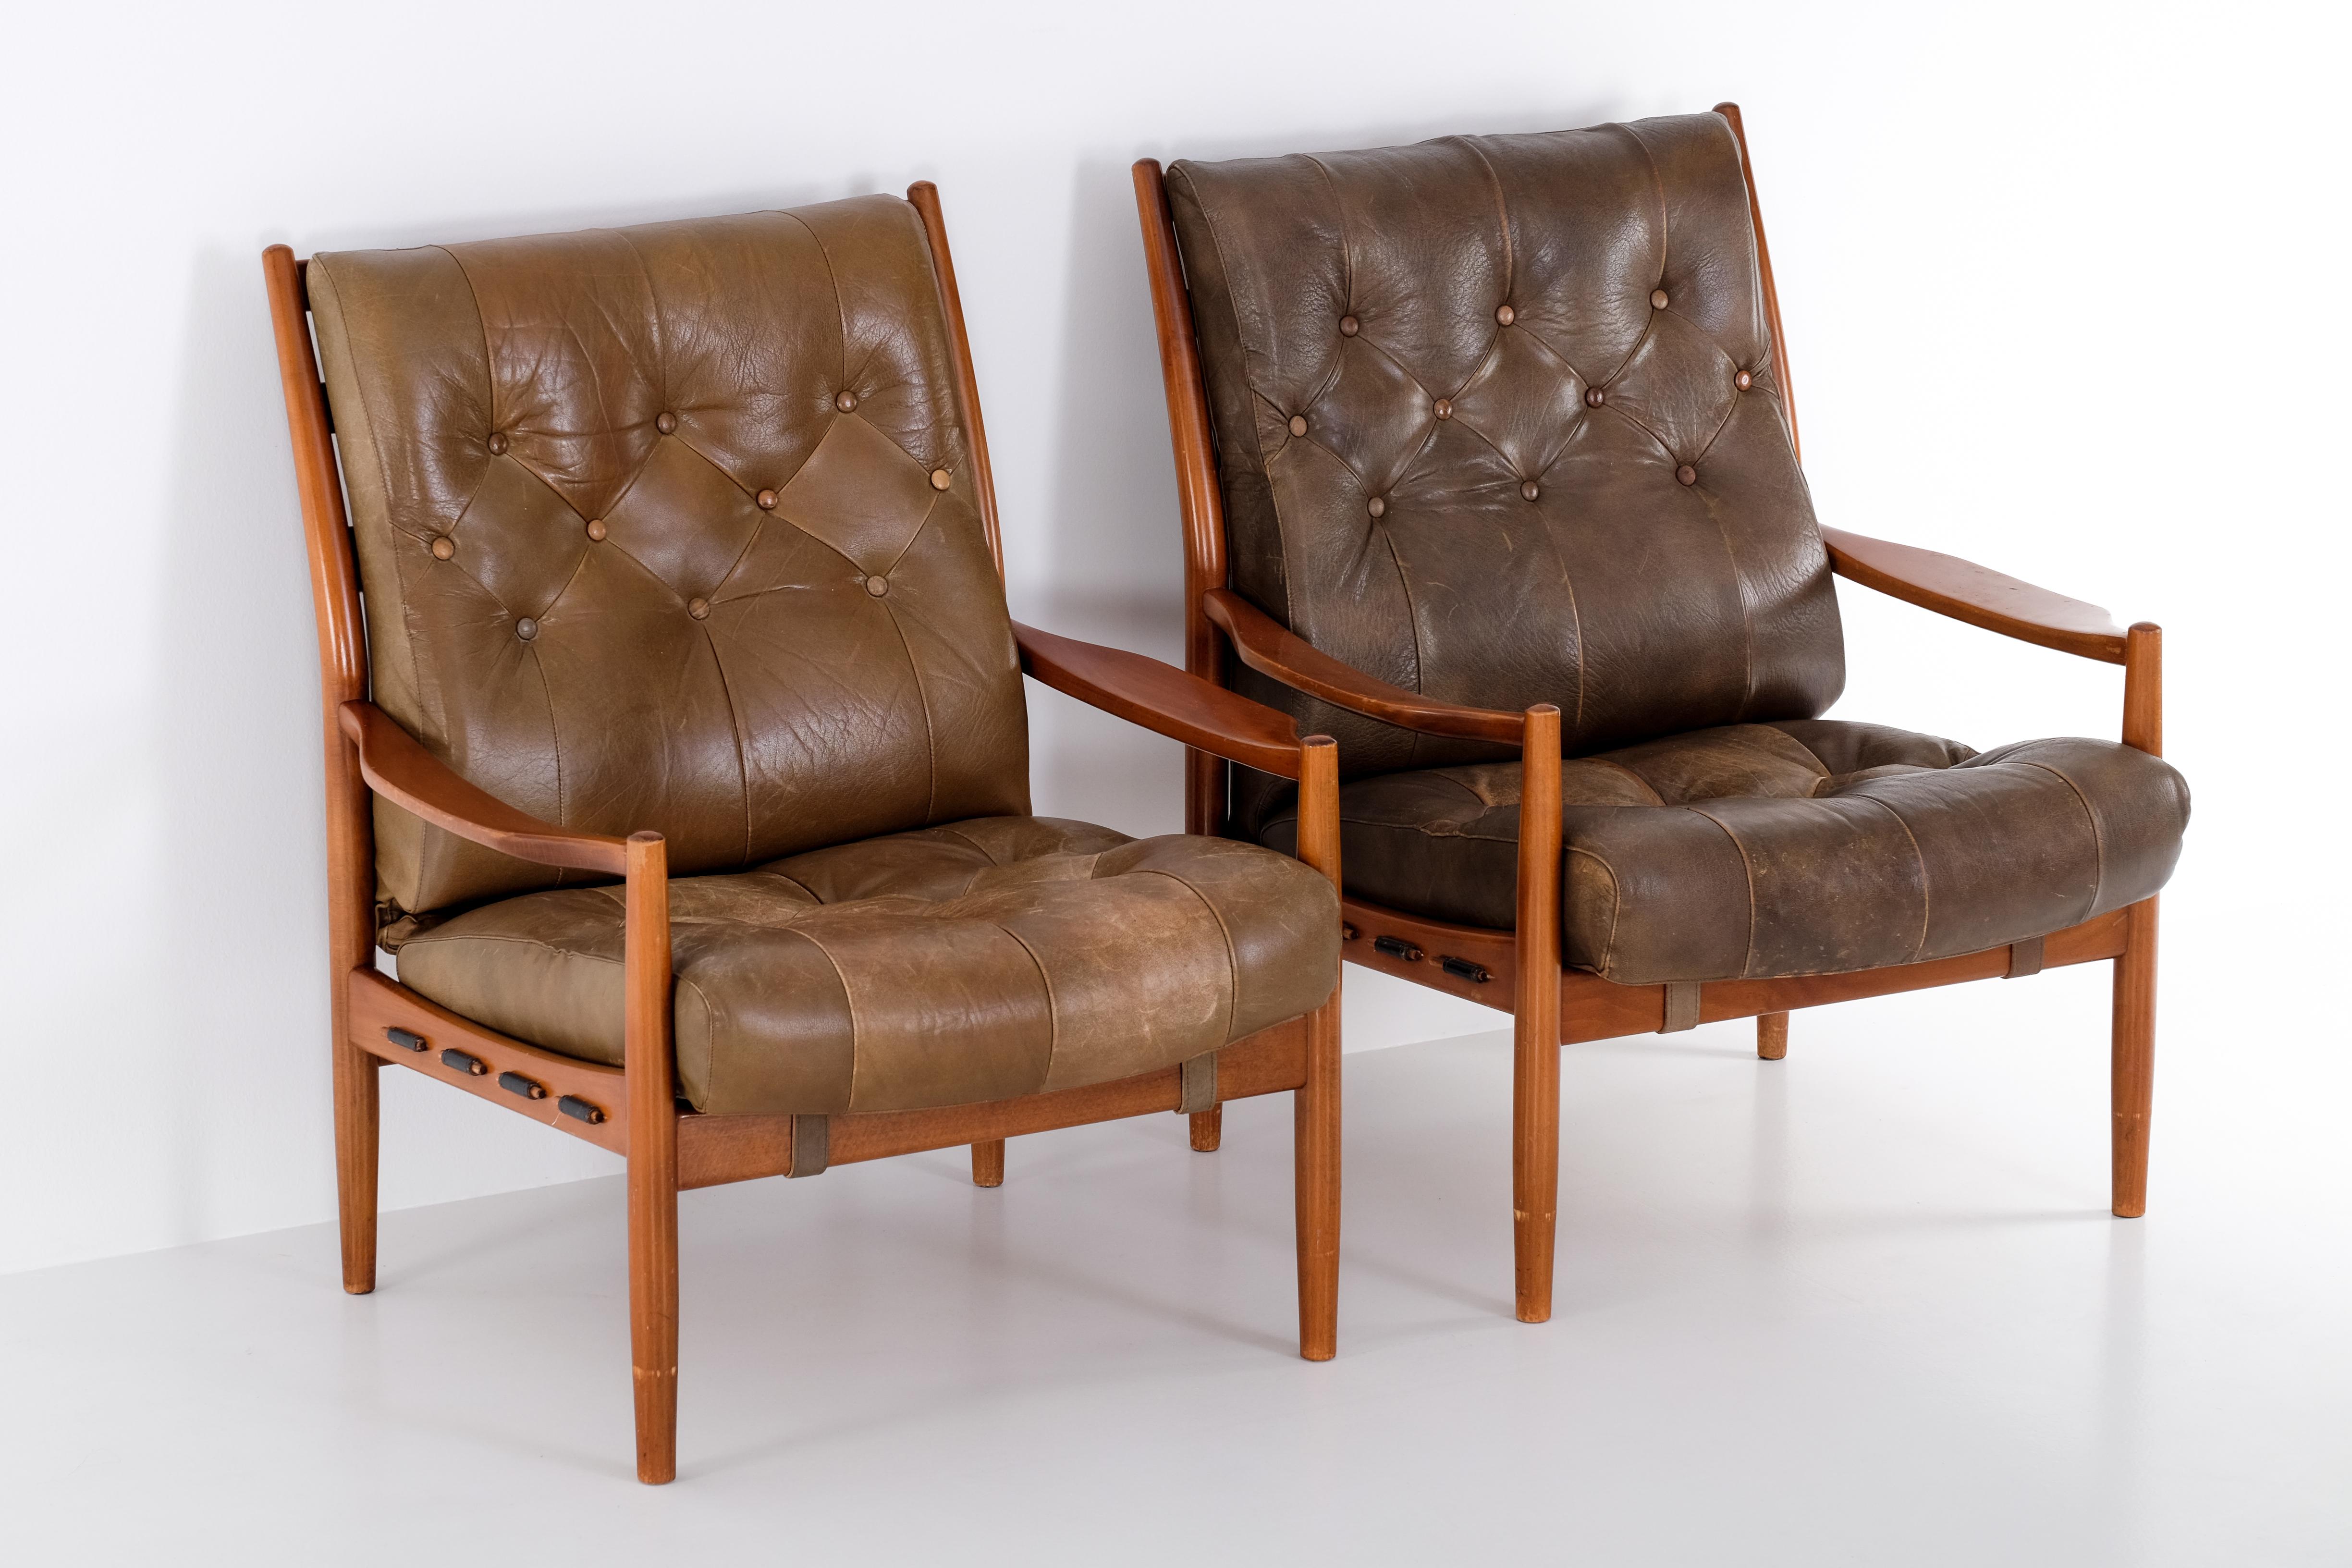 Swedish Pair of 'Läckö' Easy Chairs by Ingemar Thillmark, 1960s For Sale